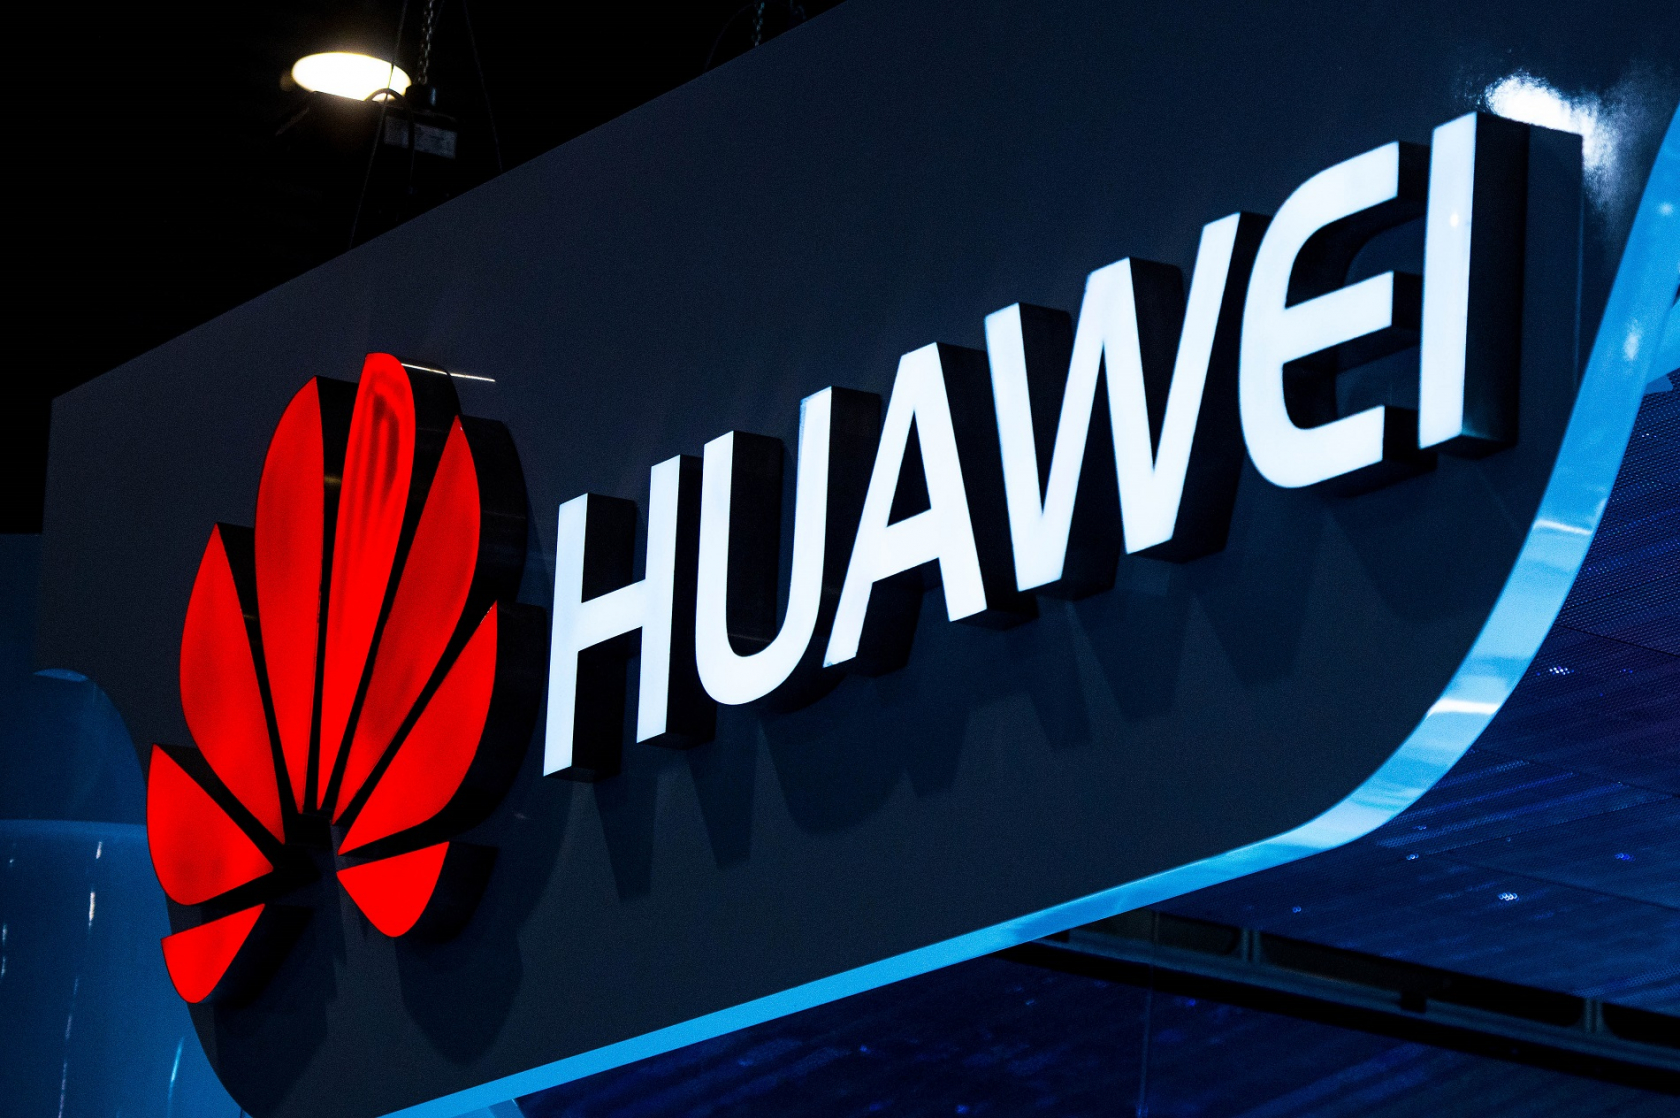 Huawei moves past Apple to become world's second largest smartphone seller